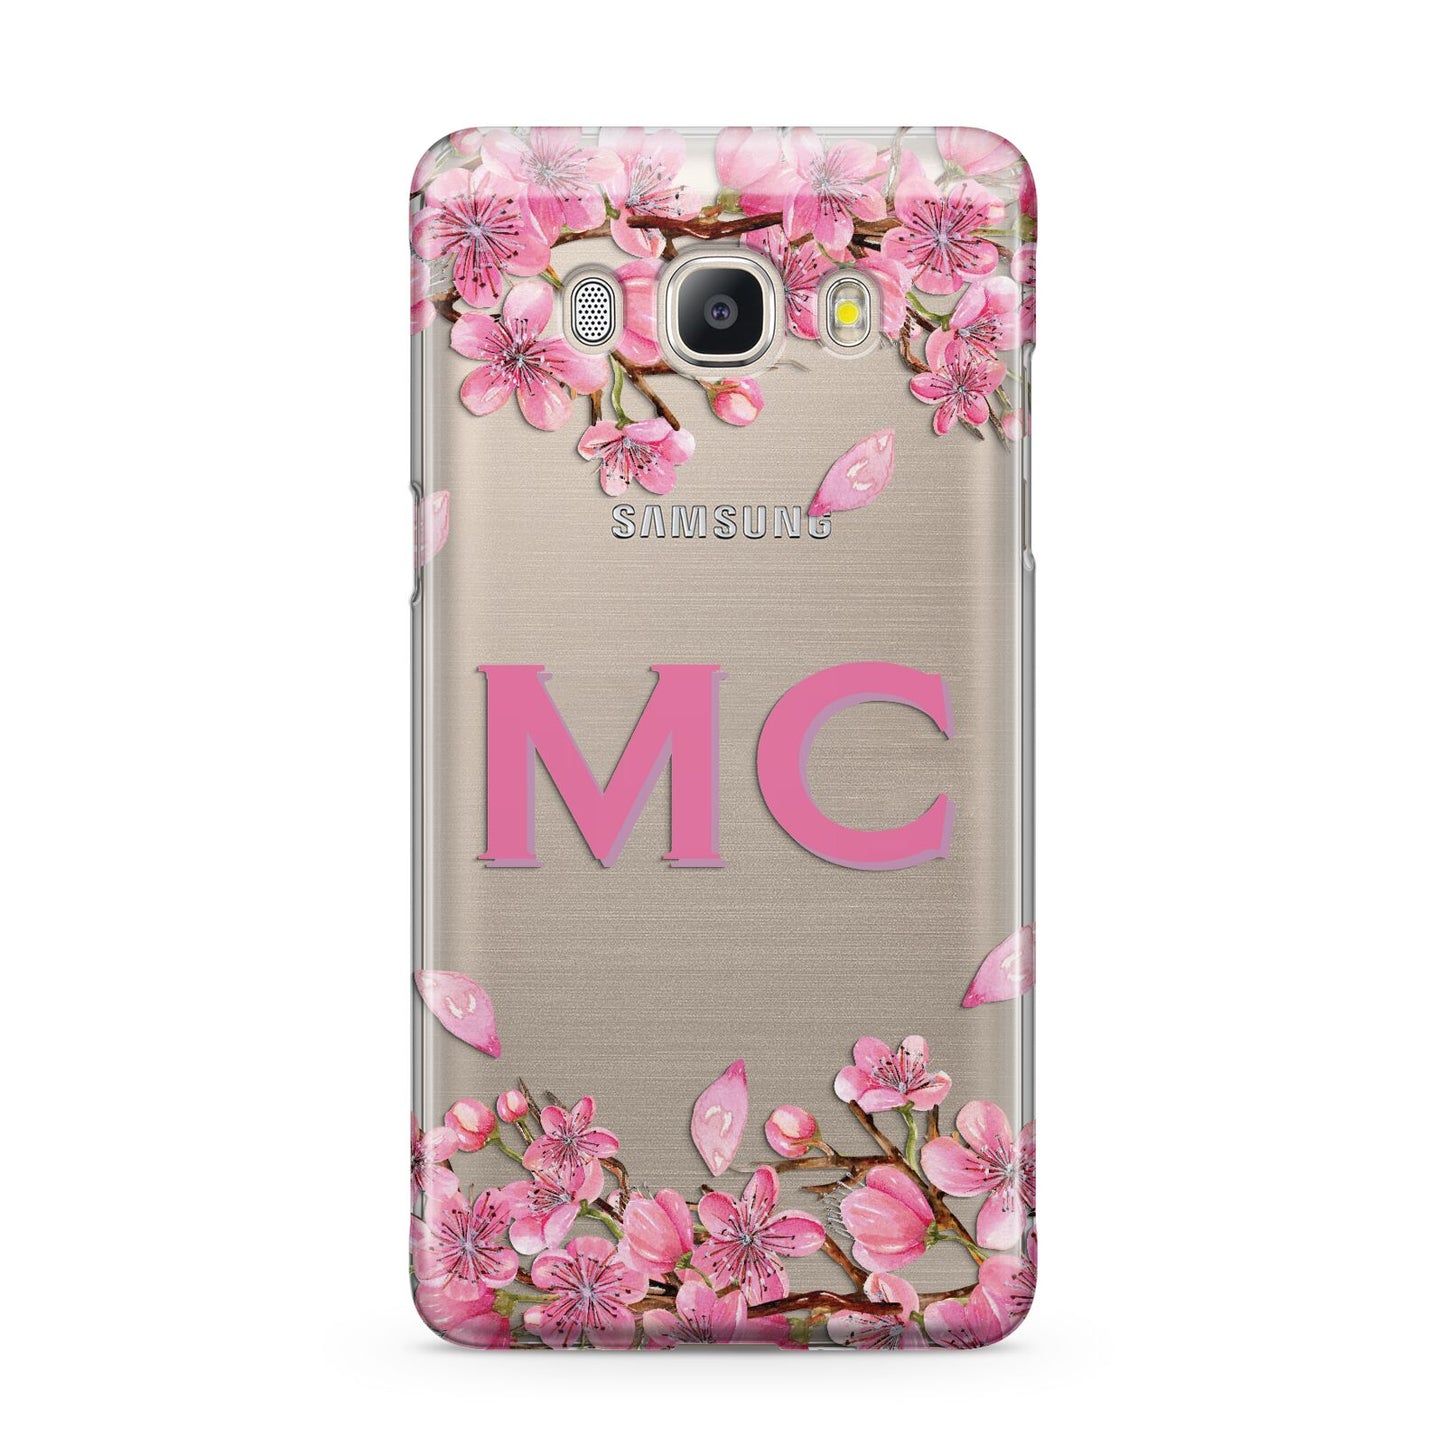 Personalised Vibrant Cherry Blossom Pink Samsung Galaxy J5 2016 Case